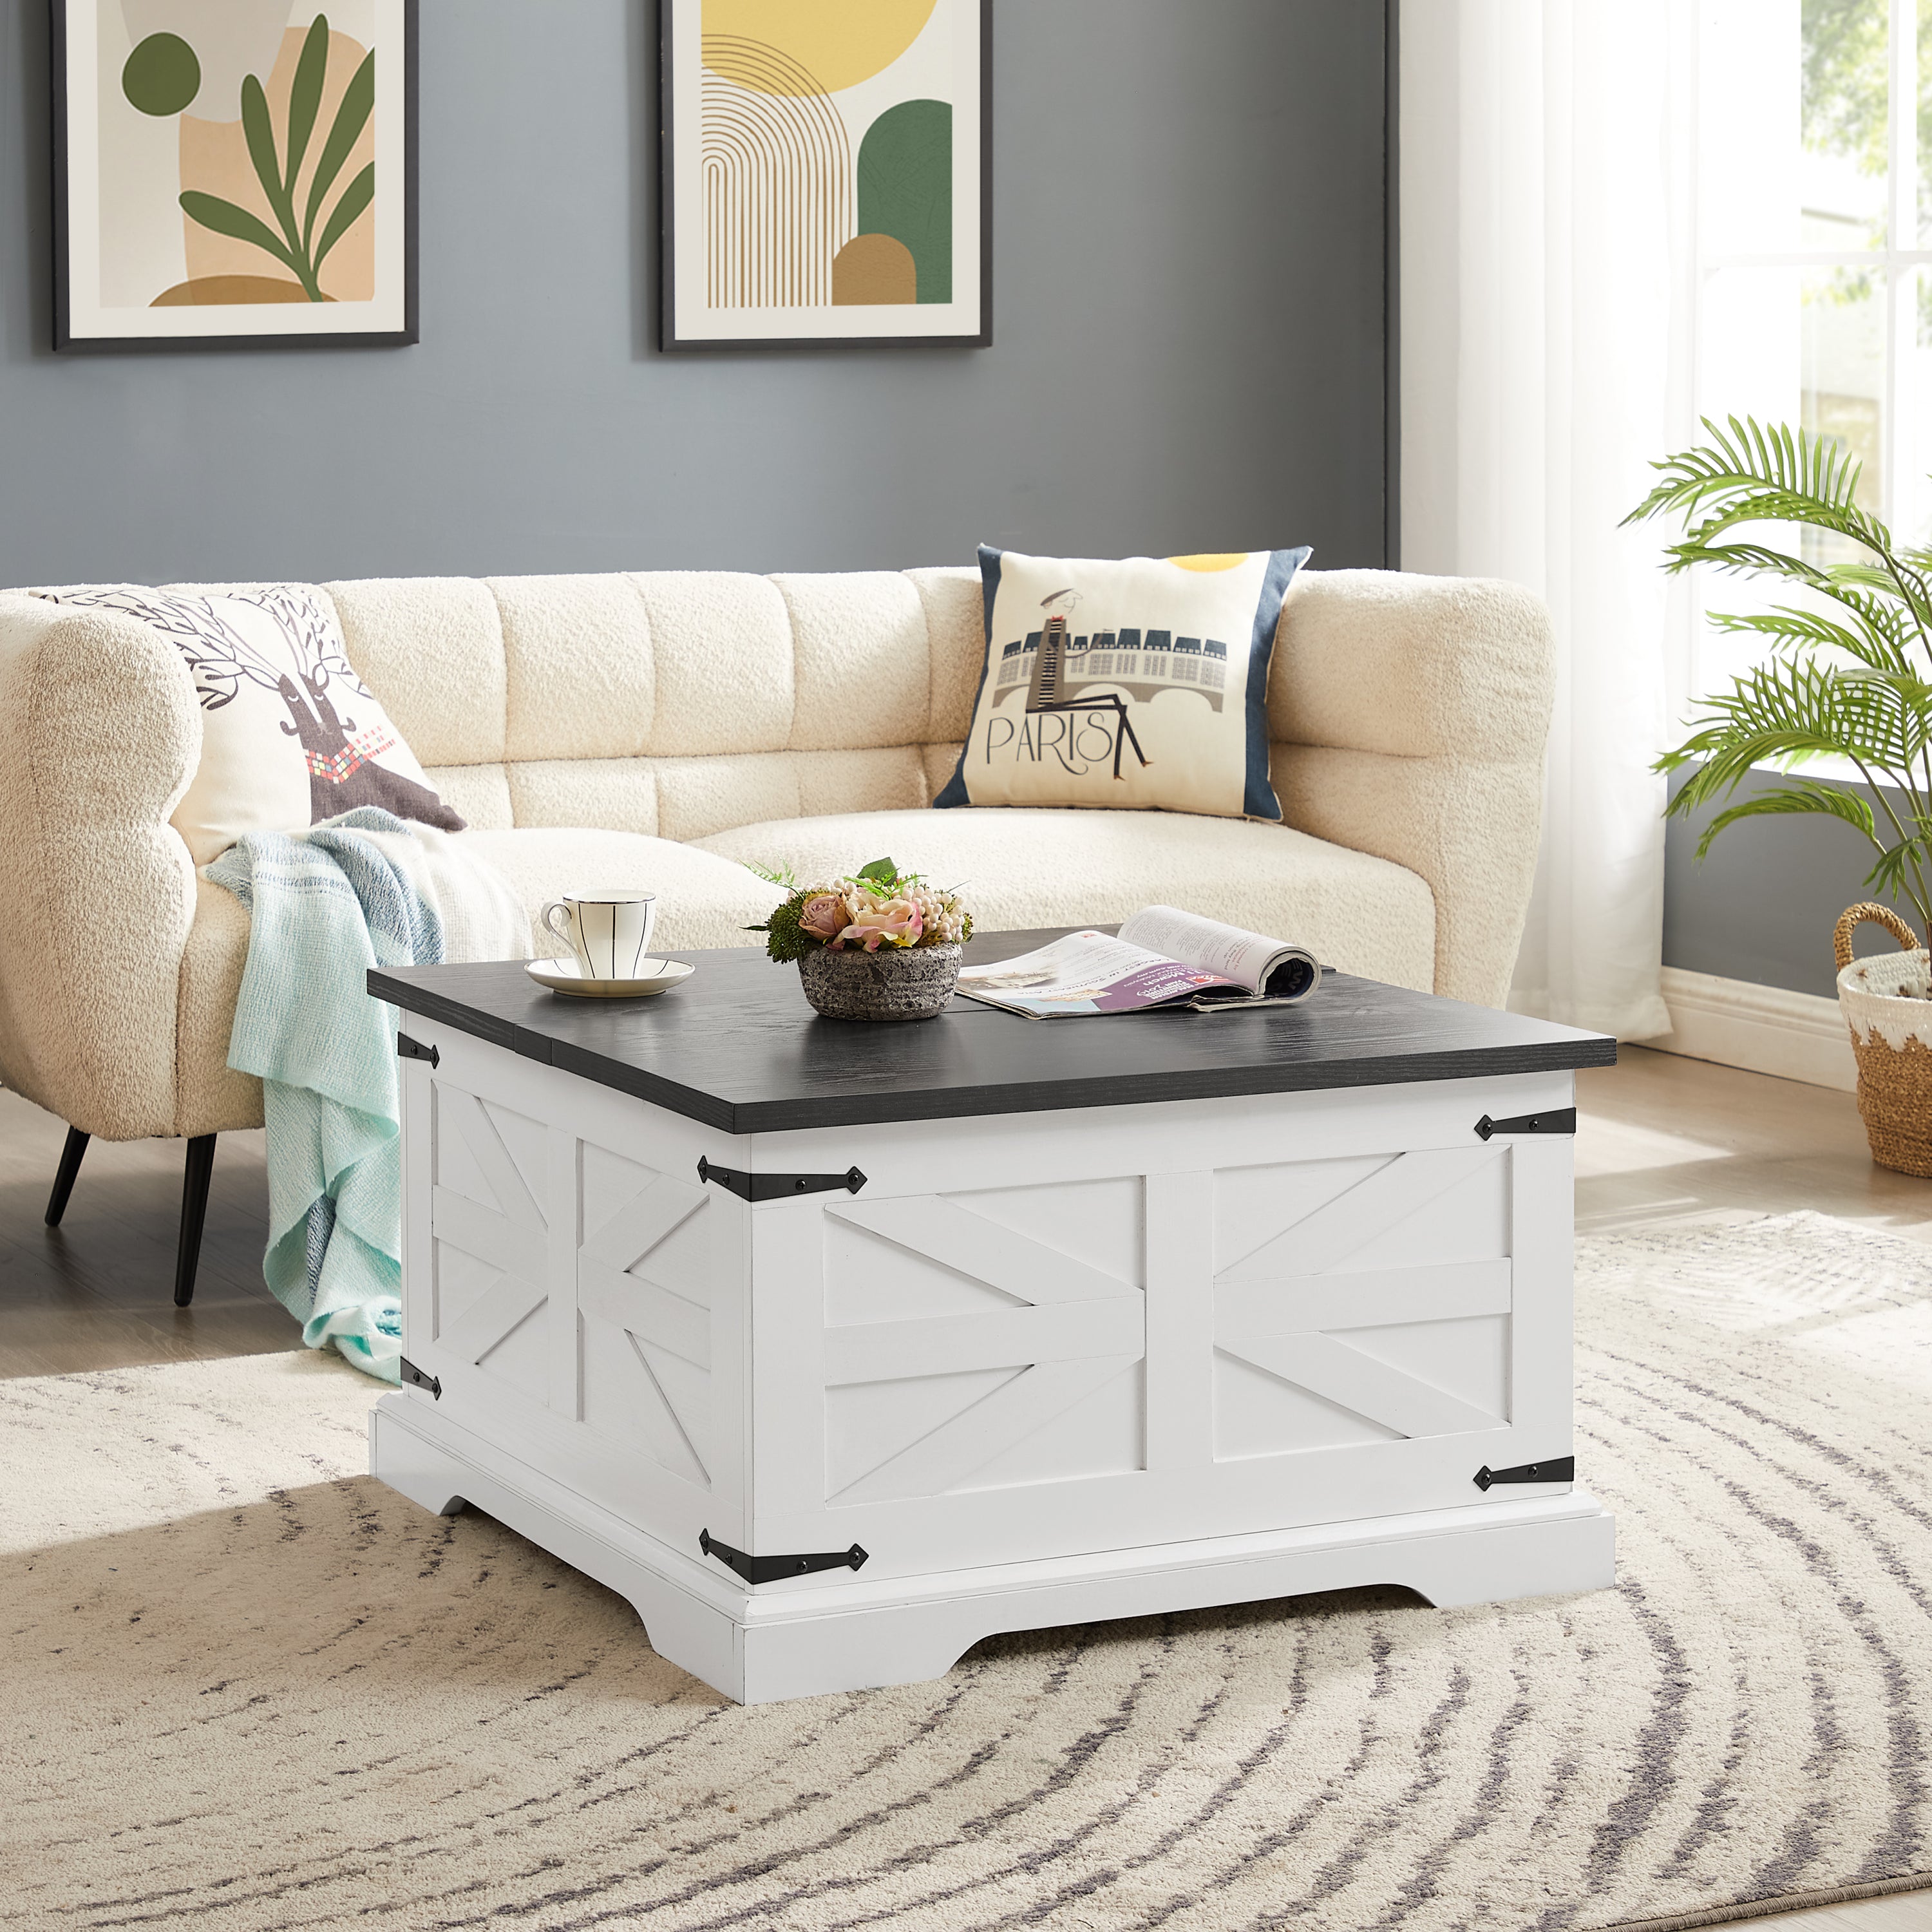 🆓🚛 Farmhouse Coffee Table, Square Wood Center Table With Large Hidden Storage Compartment for Living Room, Barn Design Center Table Rustic Cocktail Table With Hinged Lift Top, White & Gray